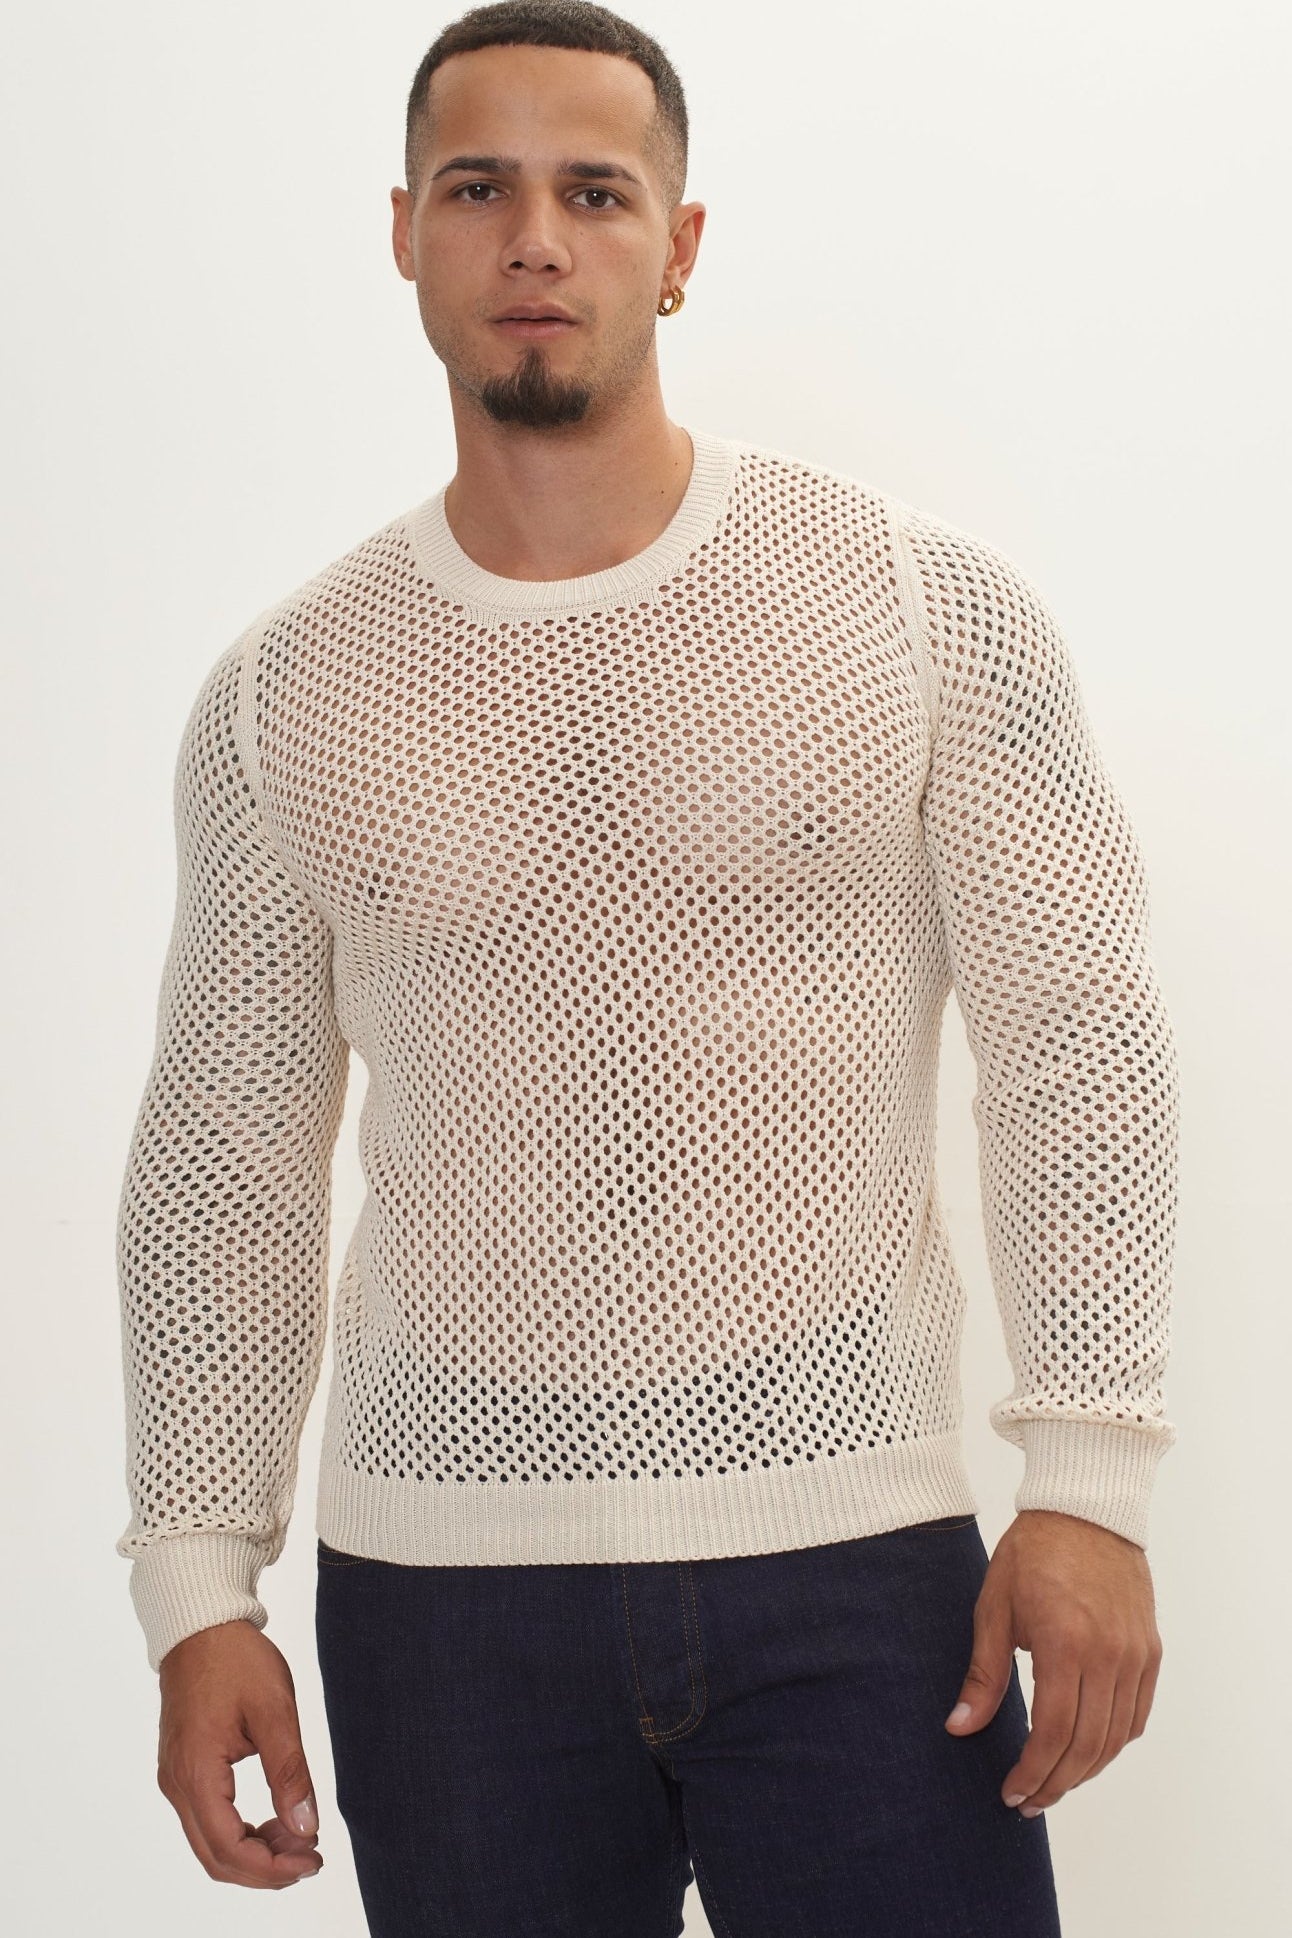 See Through Fishnet Muscle Fit Shirt - Beige - Ron Tomson